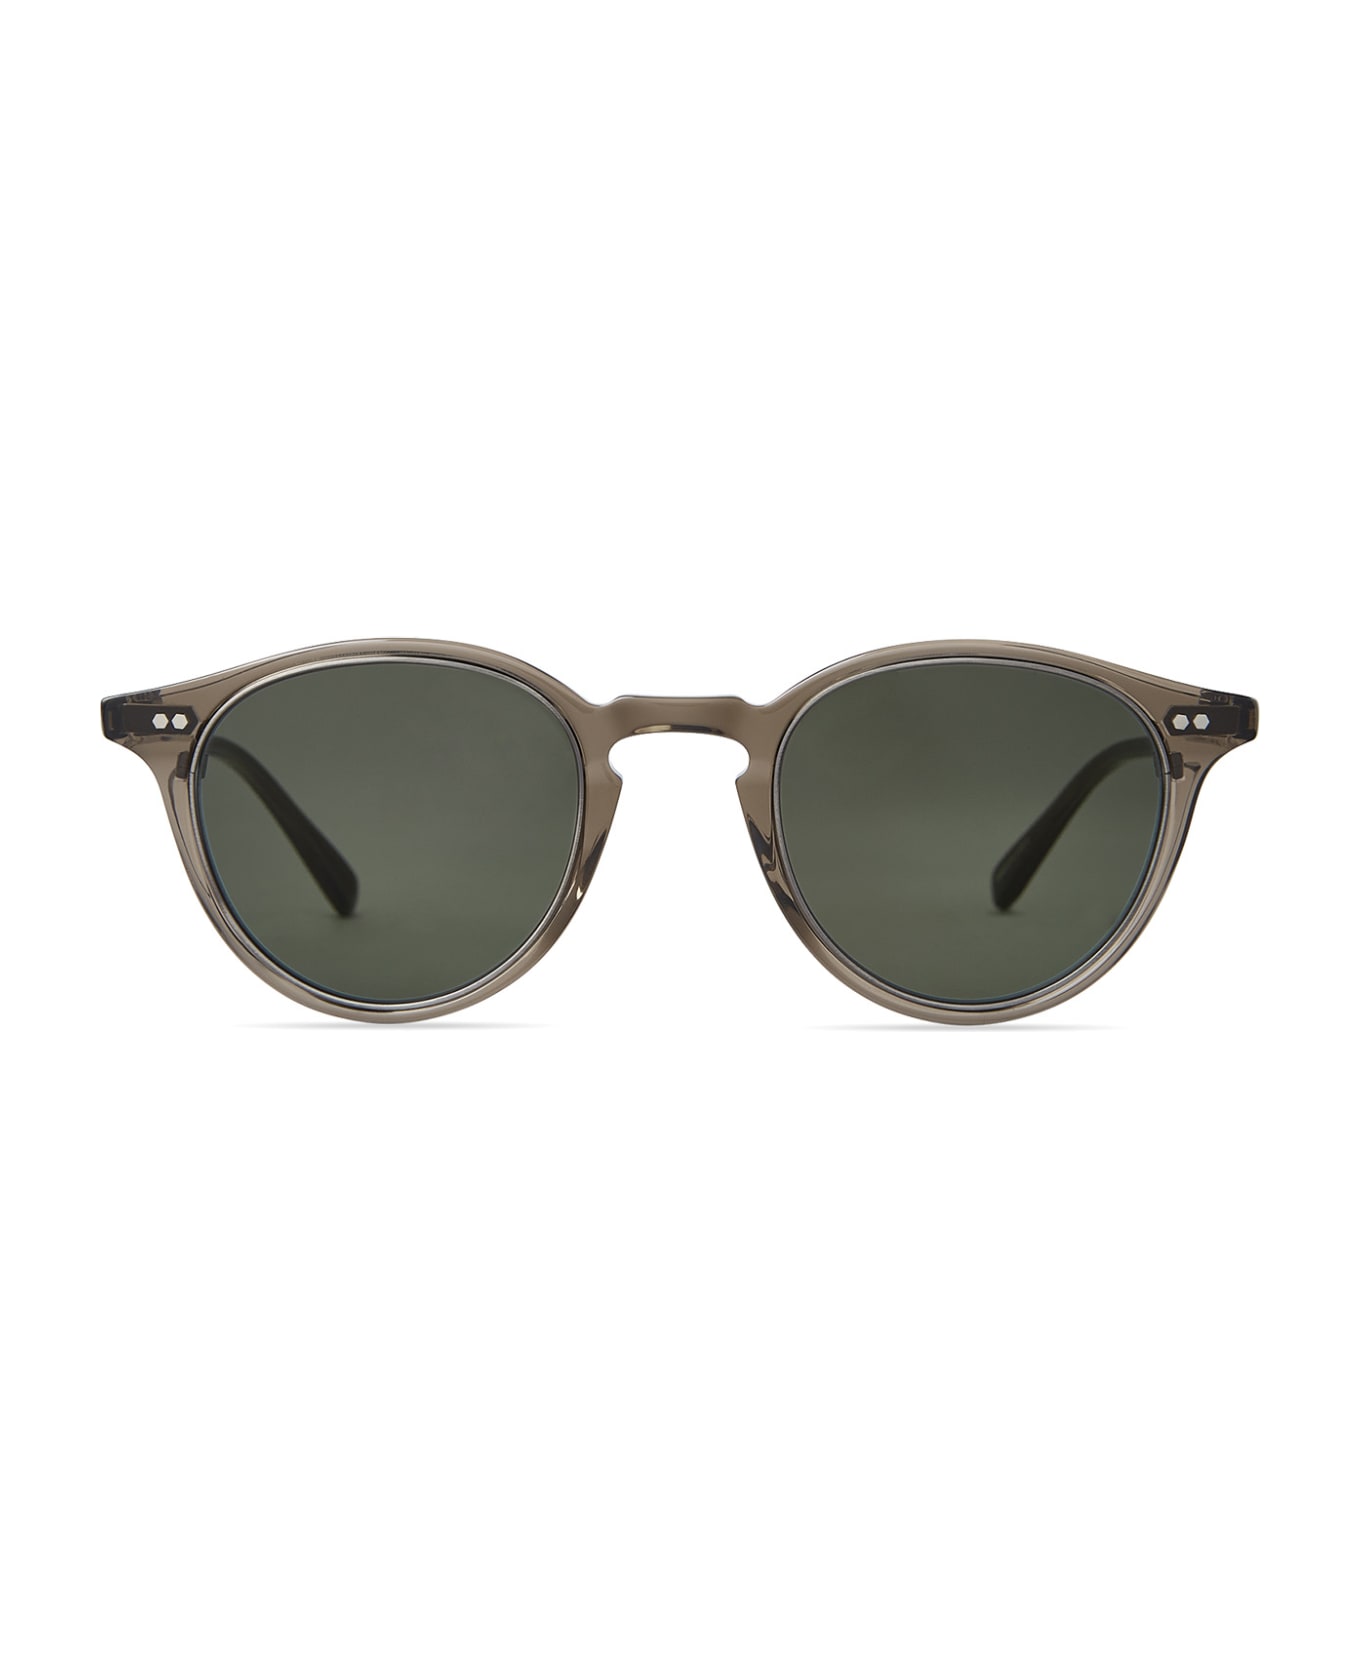 Mr. Leight Marmont Ii S Stone-pewter Sunglasses Ocean - Stone-Pewter